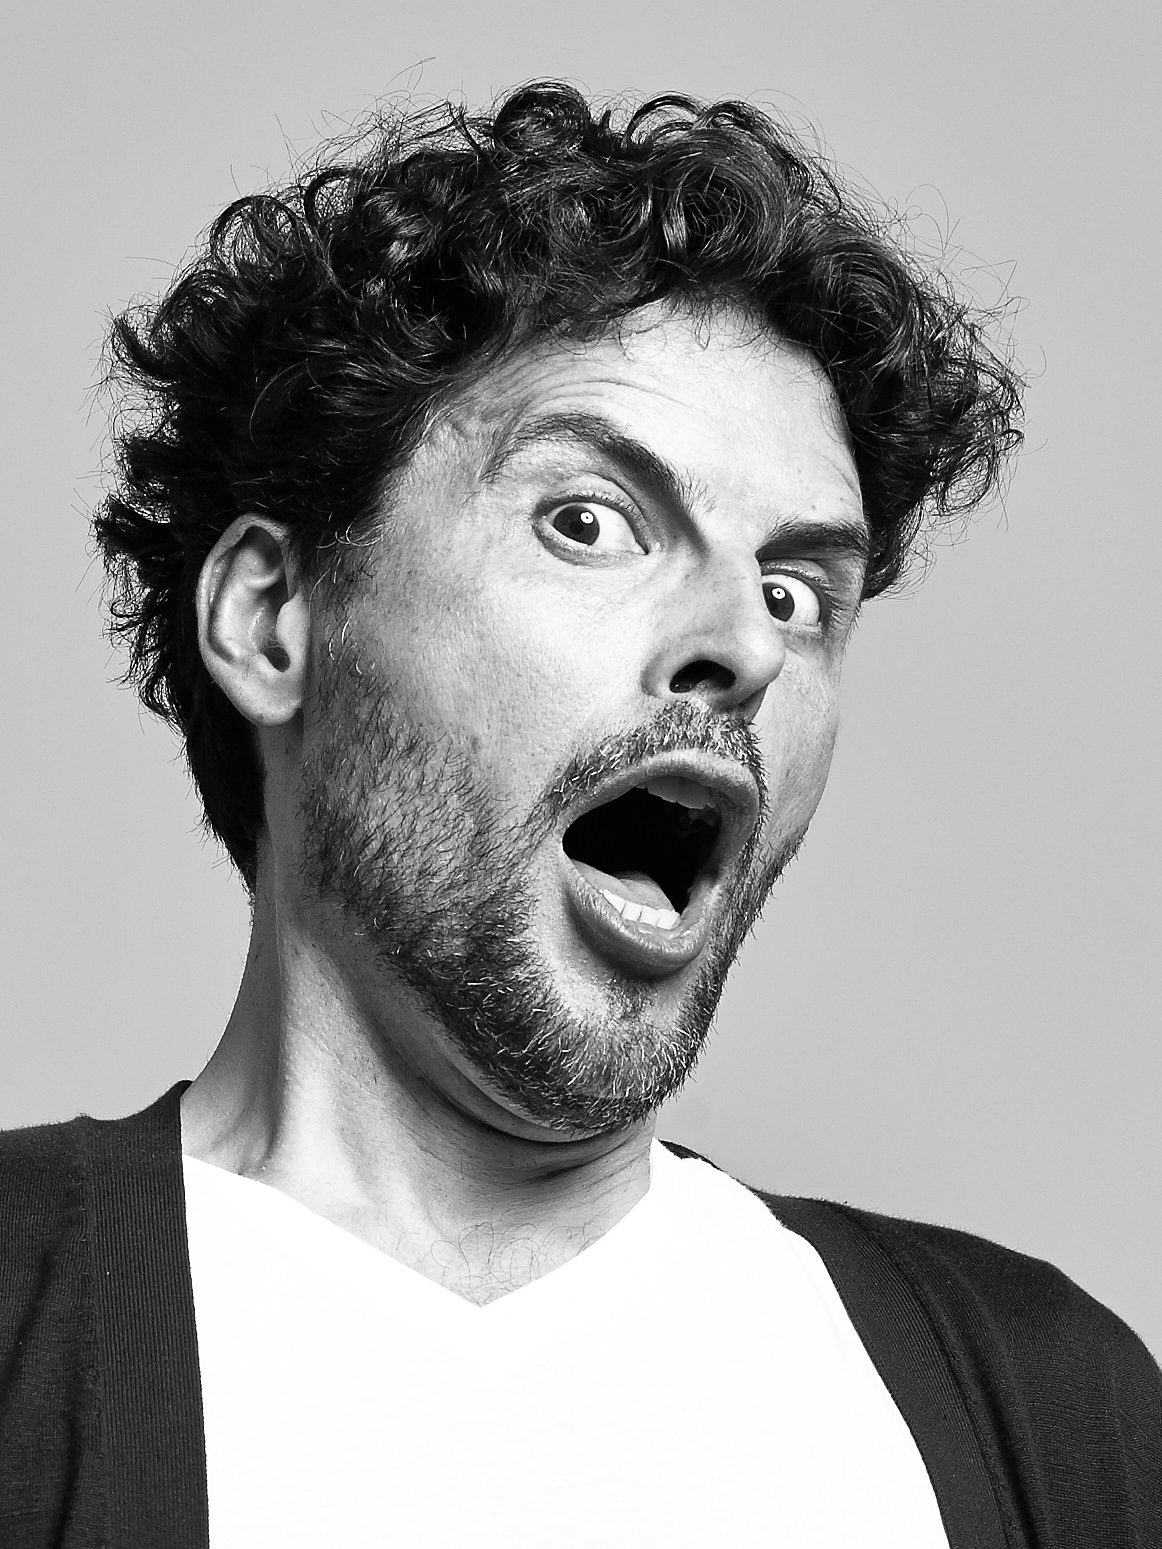 An Italian man with a very surprised look on his face with open mouth and eyes wide open,  displaying a mixture of surprise and astonishment.